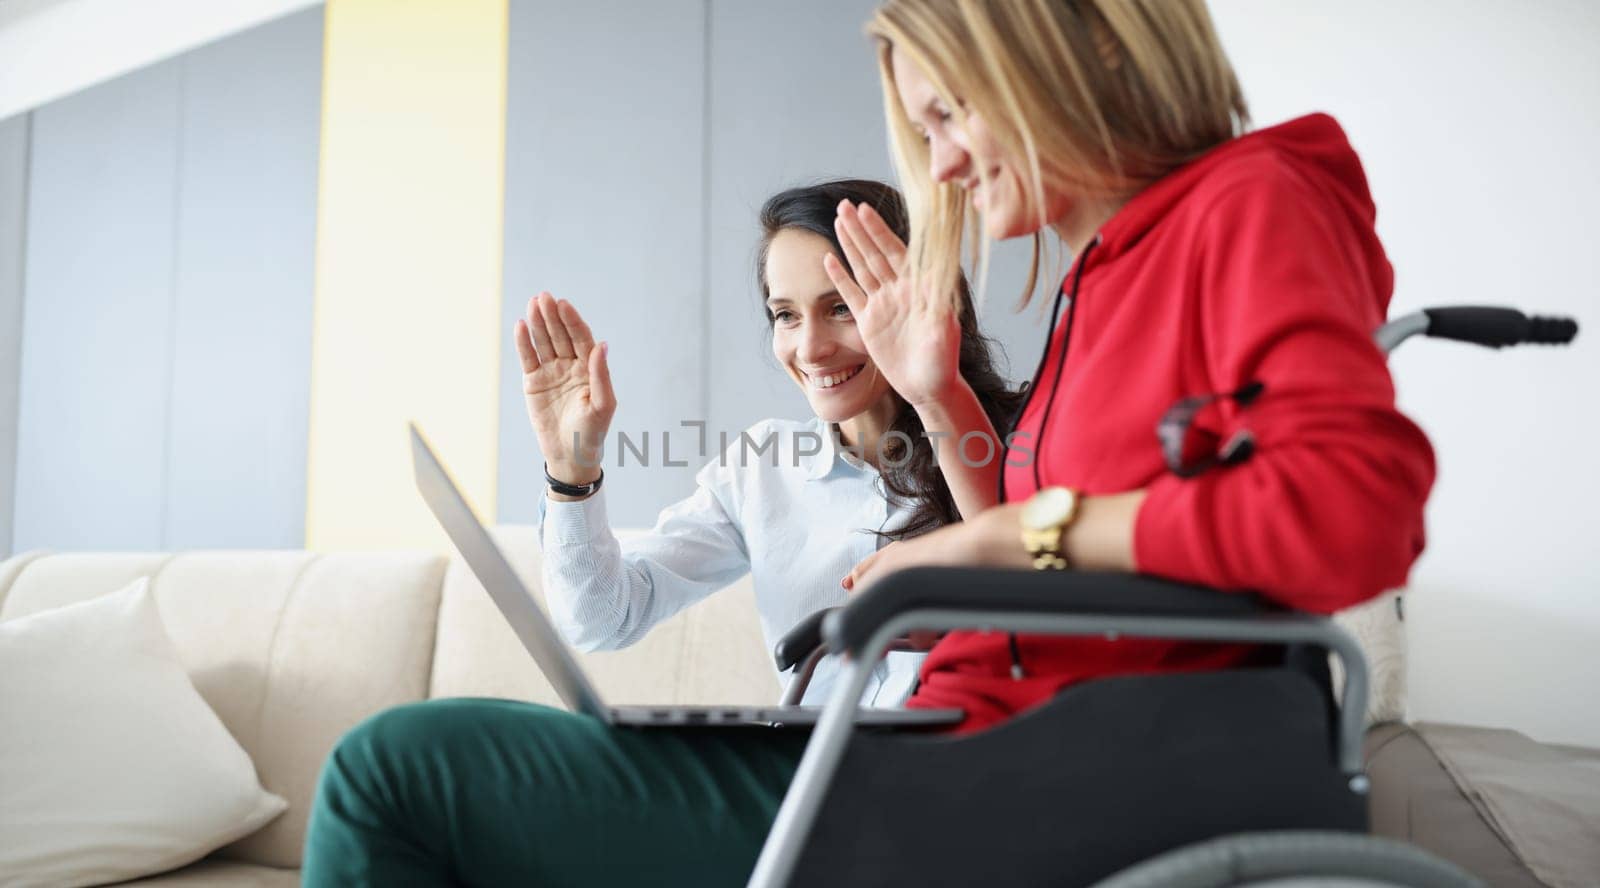 Woman with friend sitting in wheelchair and holding laptop waving to monitor. Remote work for people with disabilities concept